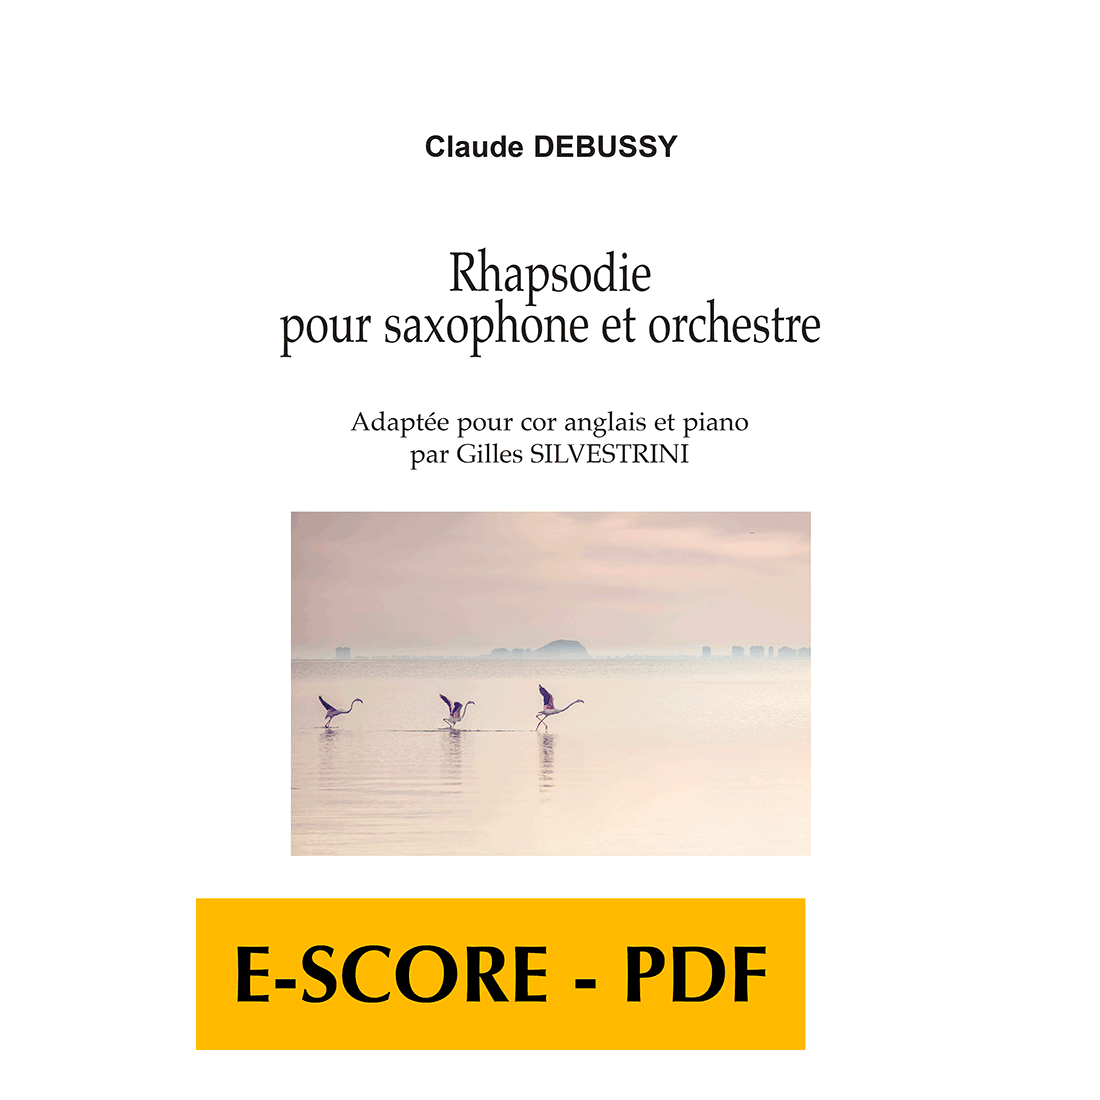 Rhapsody for saxophone and orchestra adapted for English horn - E-score PDF